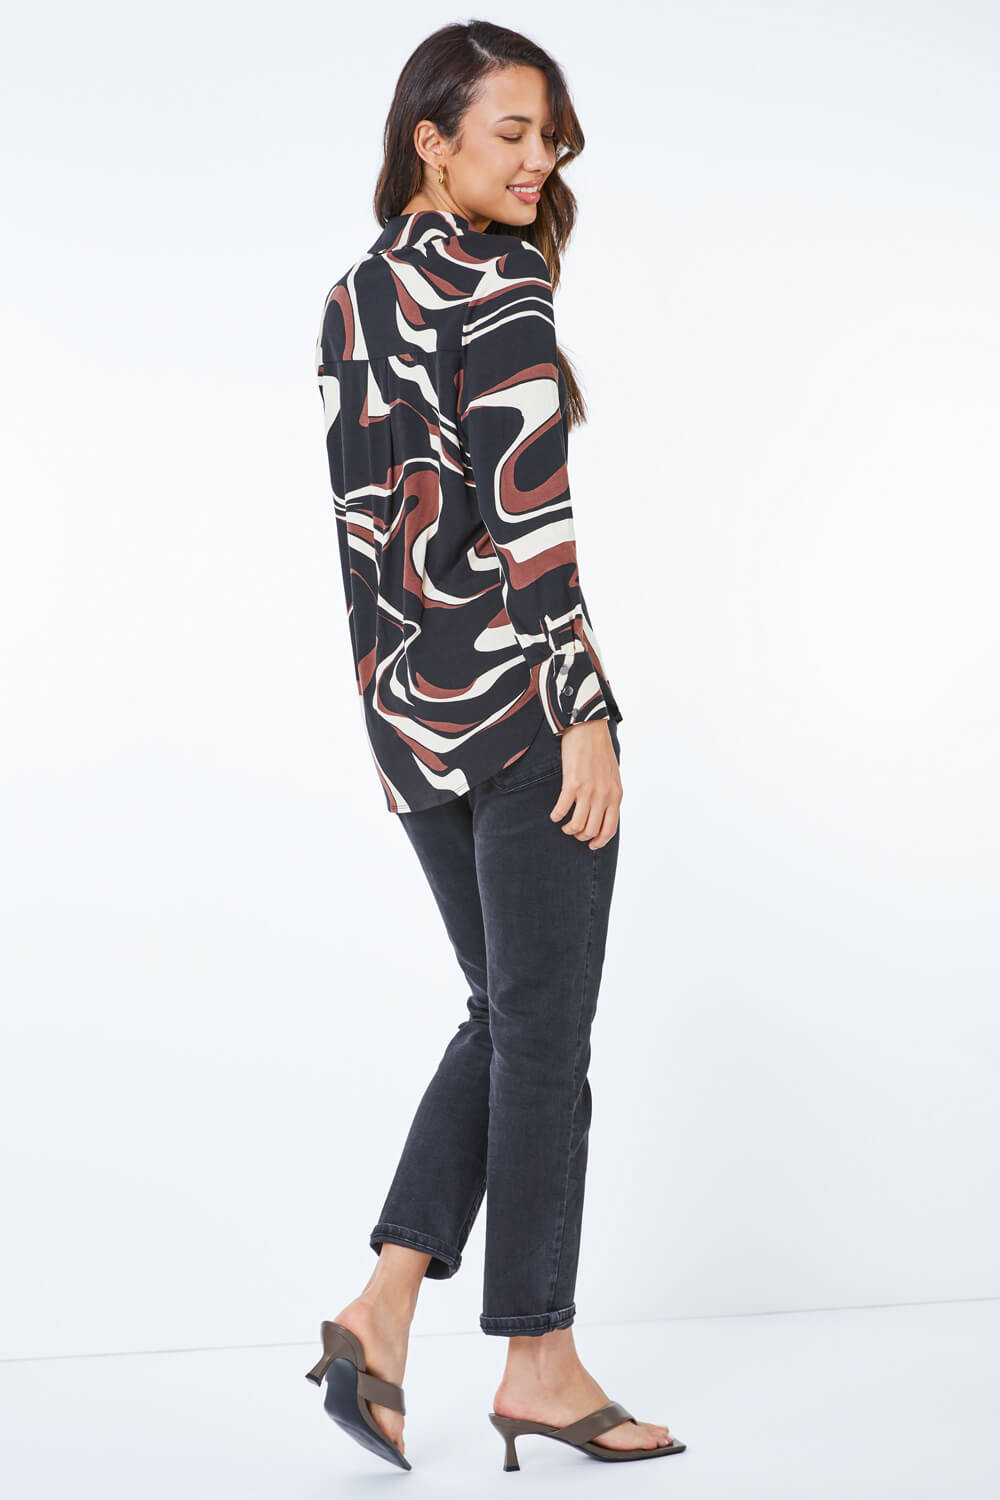 Black Abstract Swirl Jersey Stretch Shirt, Image 3 of 5